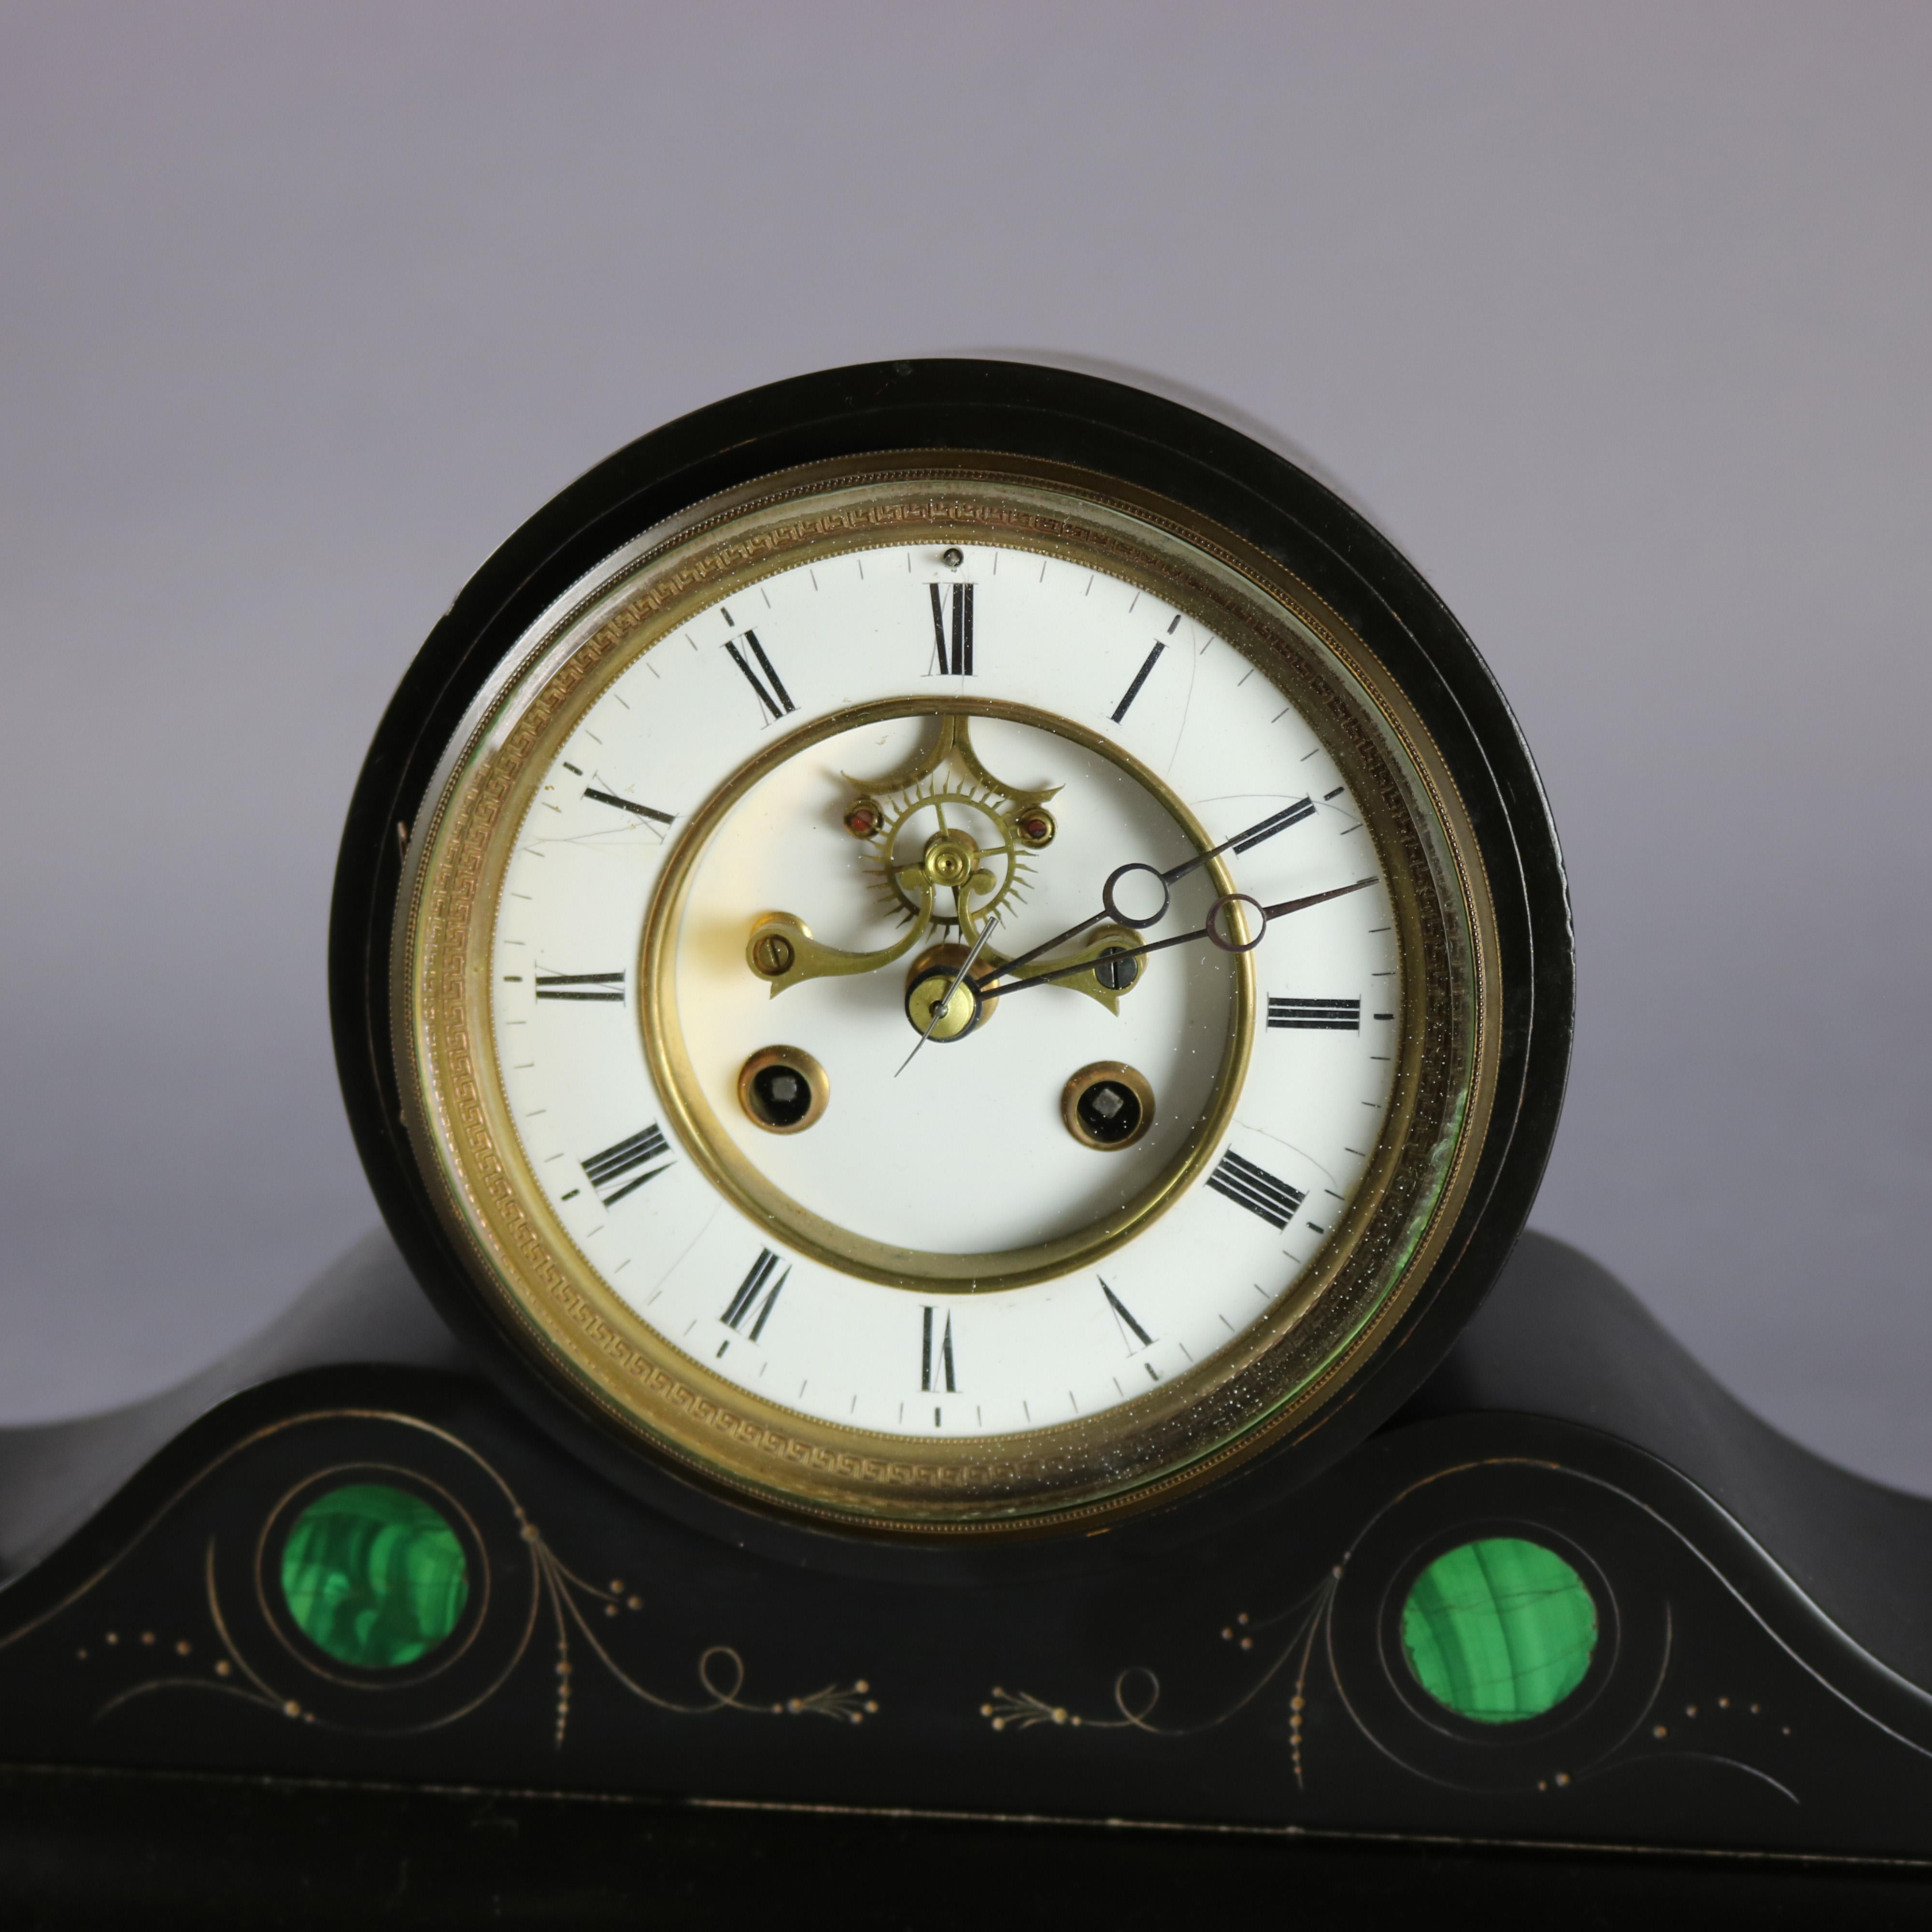 An antique Victorian mantel clock offers slate construction in stylized camel back form with malachite inlay and incised gilt scroll decoration, open escapement face with Roman numerals, working and with key and pendulum, circa 1890

***DELIVERY